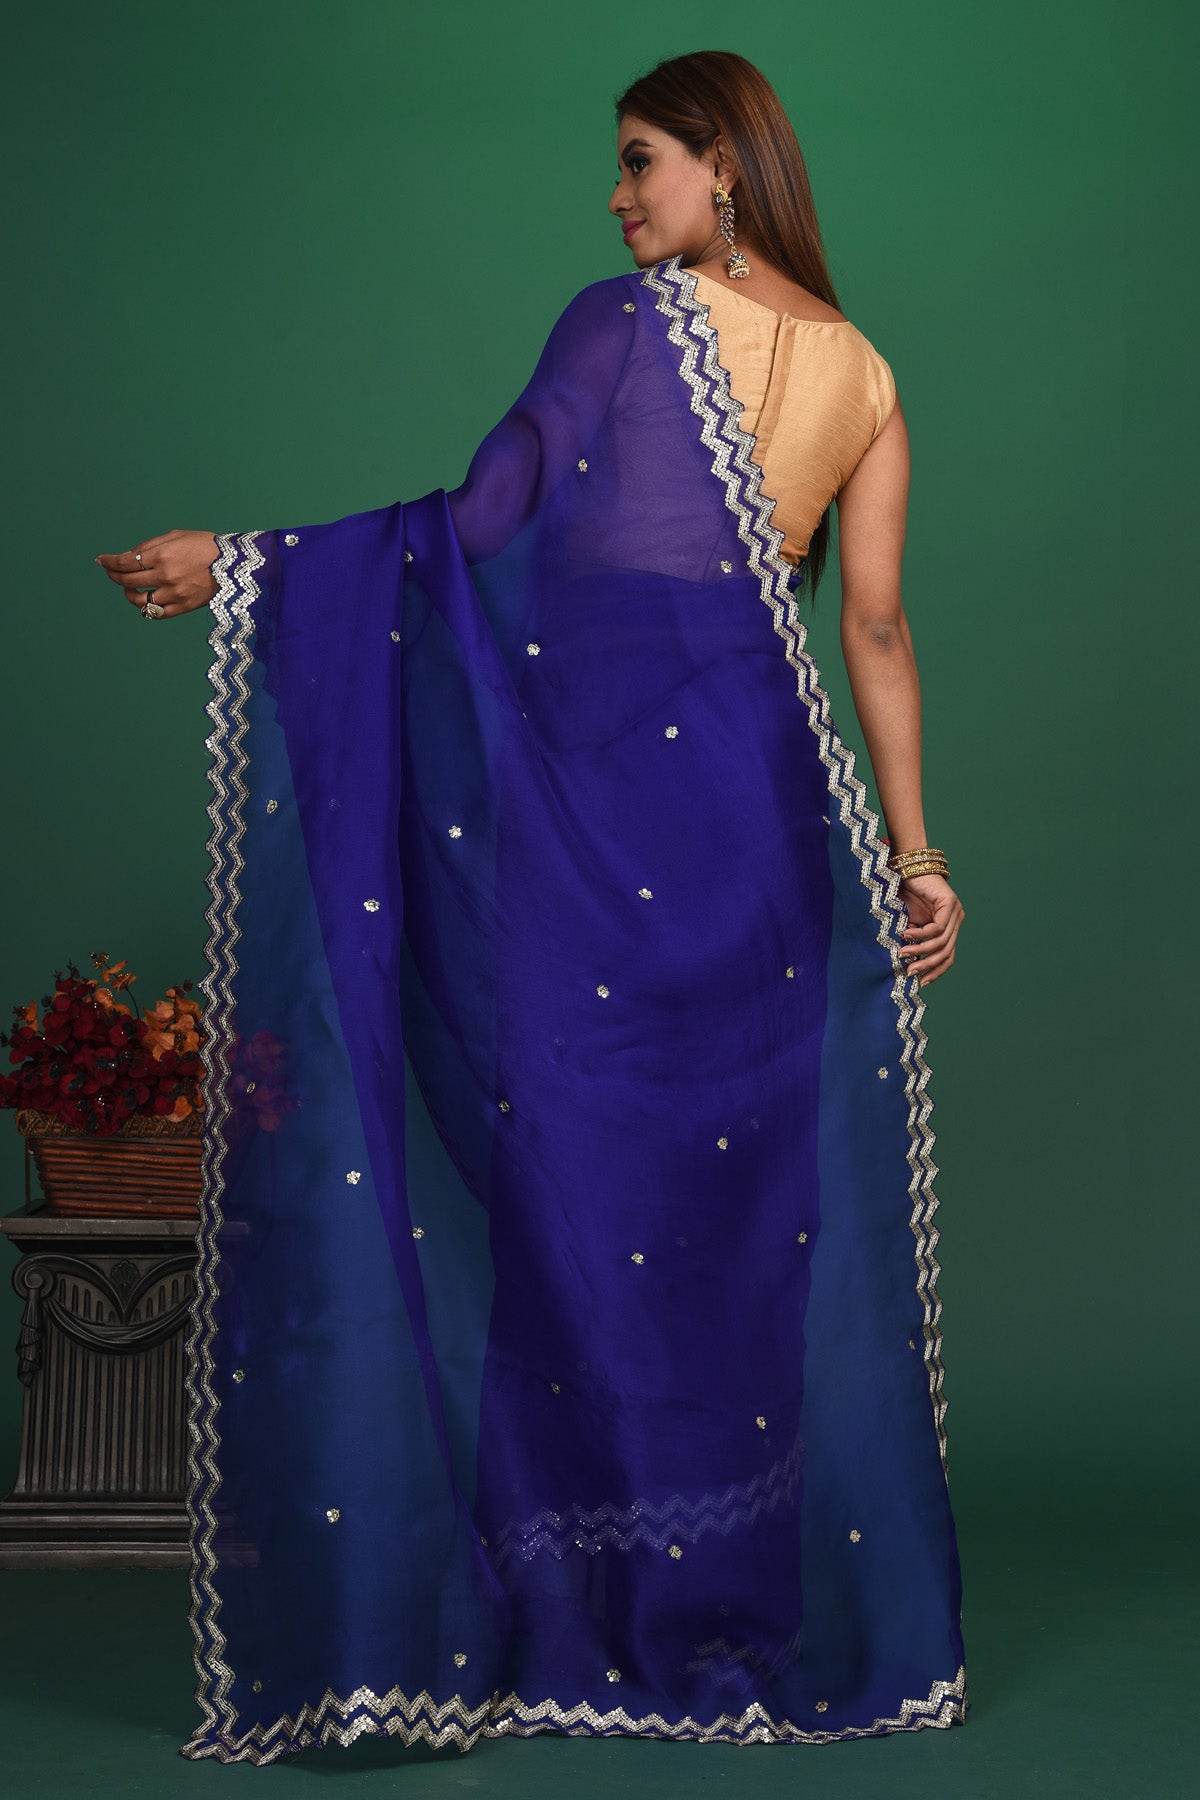 Buy beautiful royal blue embroidered organza saree online in USA. Be a vision of style and elegance at parties and special occasions in beautiful designer sarees, embroidered sarees, printed sarees, satin saris from Pure Elegance Indian fashion store in USA.-back